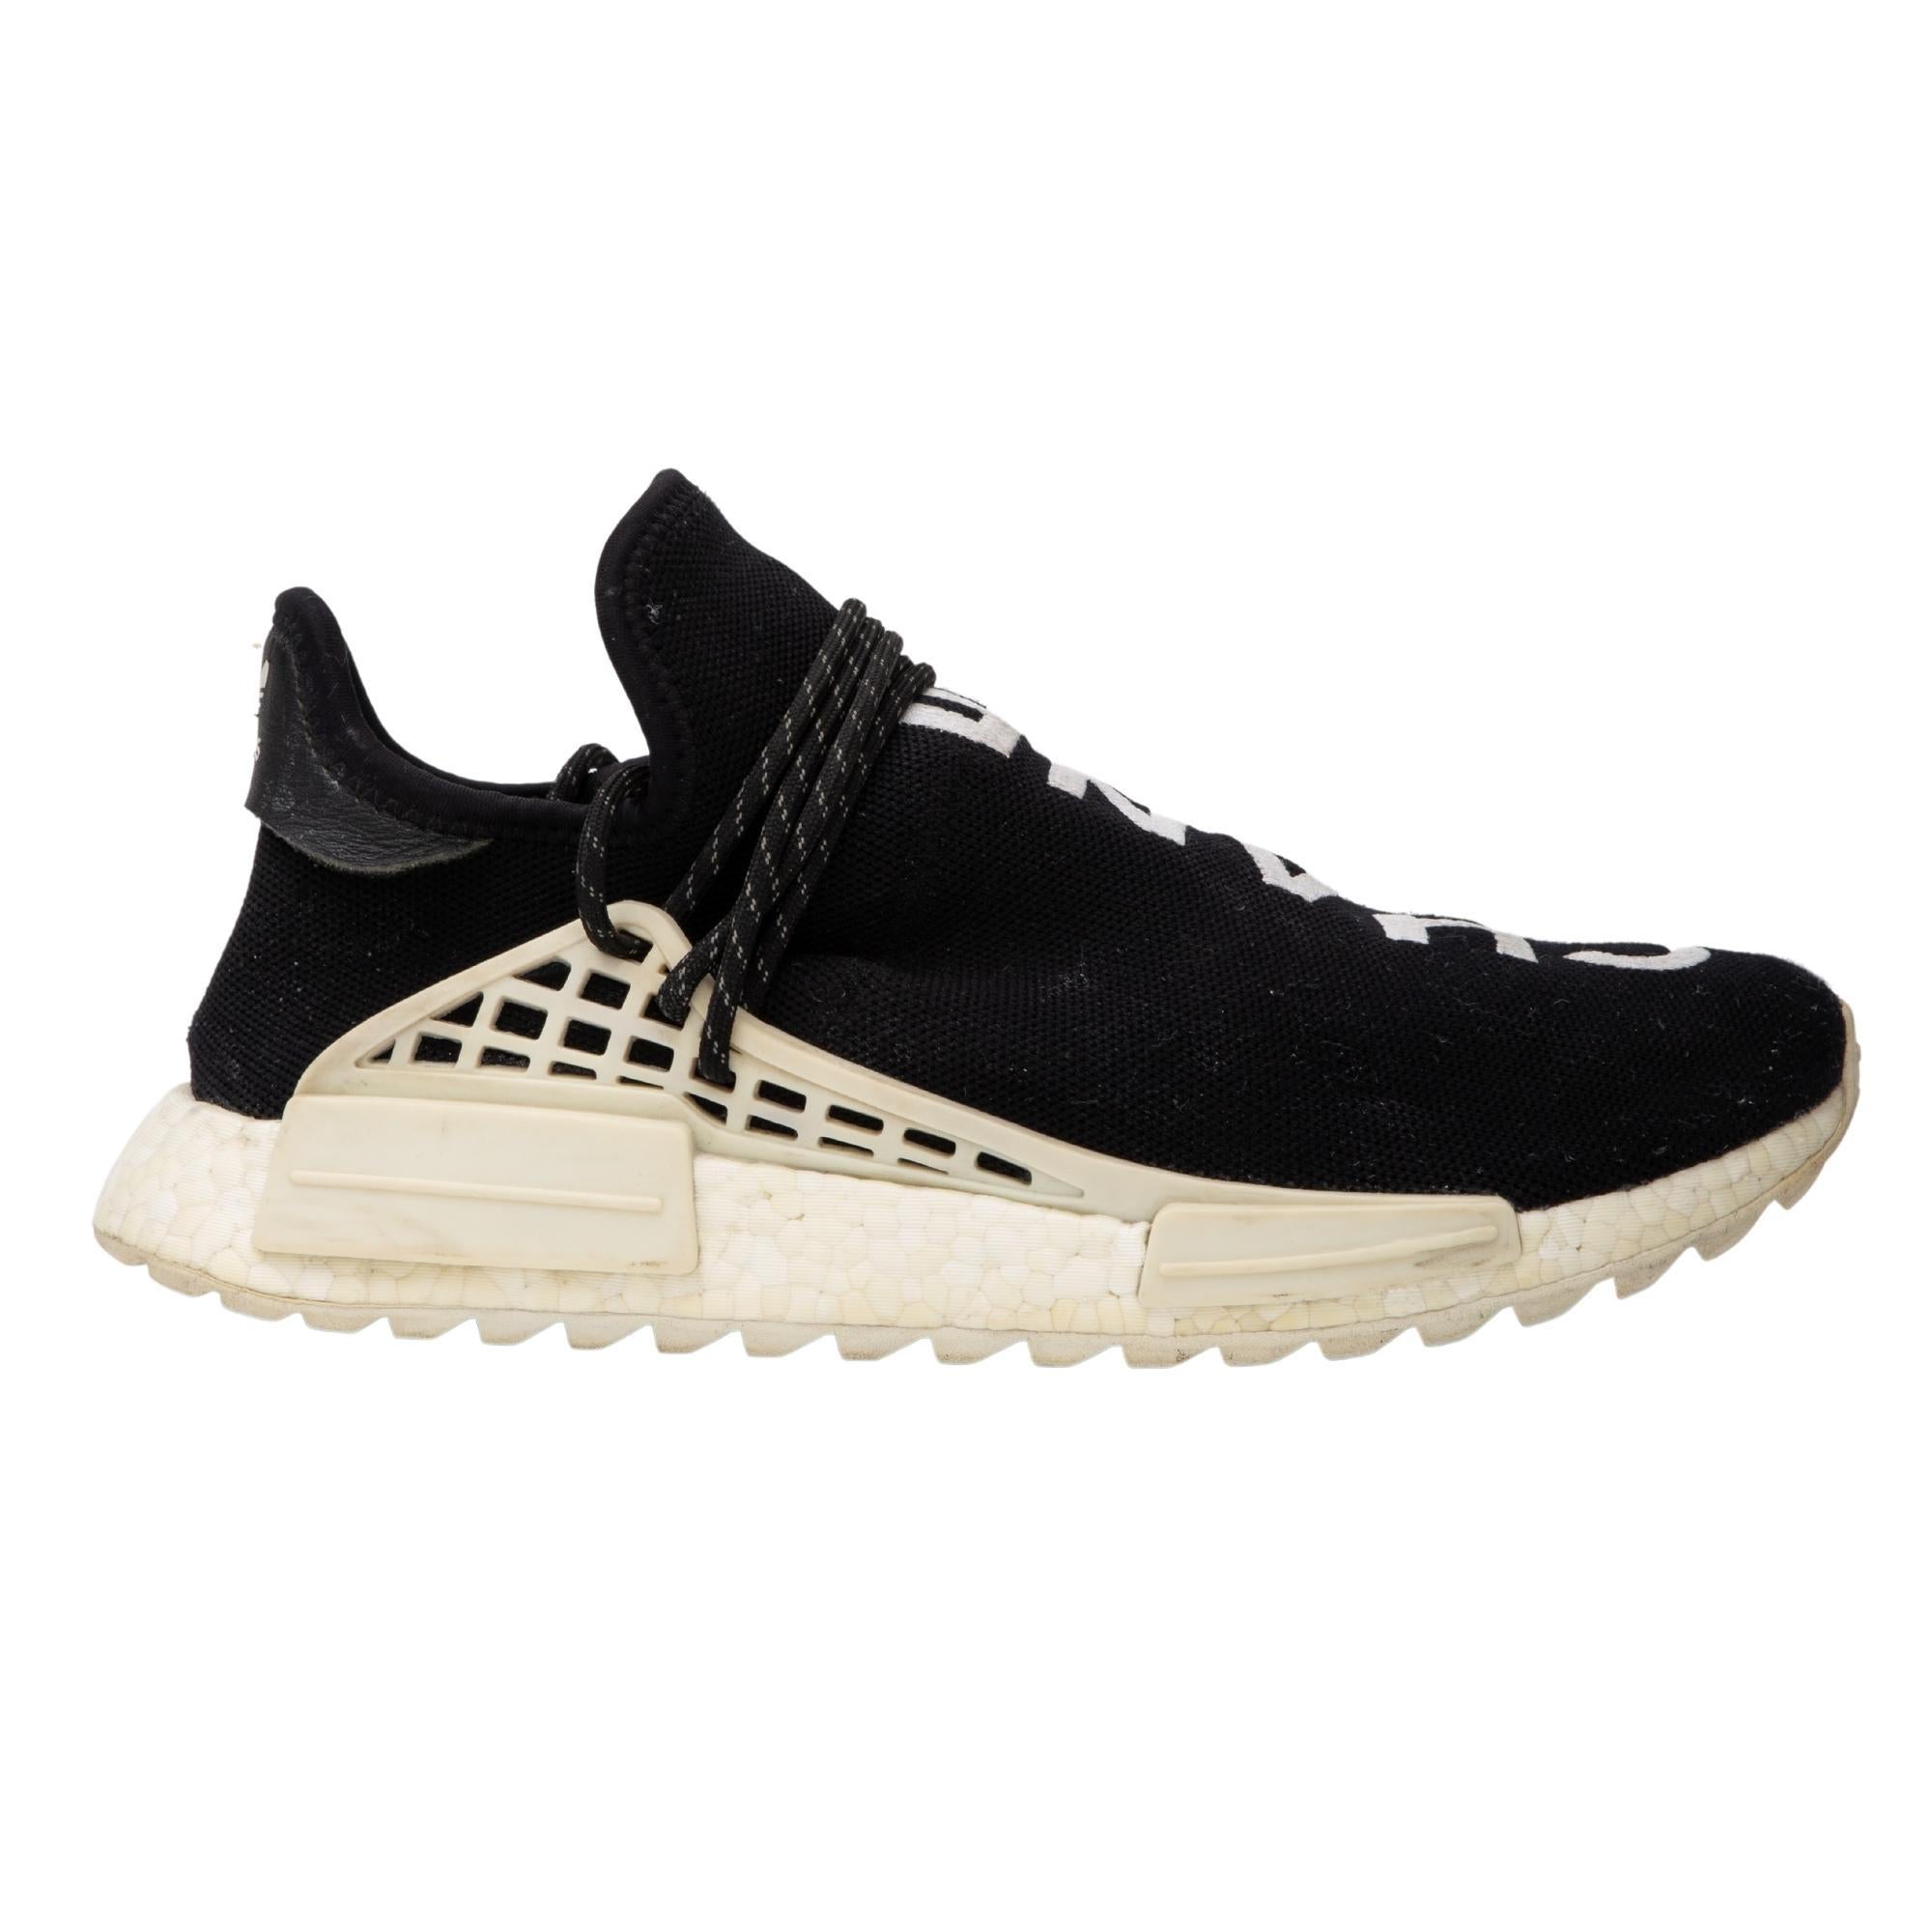 Chanel X Pharrell Adidas Human Race Sneakers (US 11) For Sale